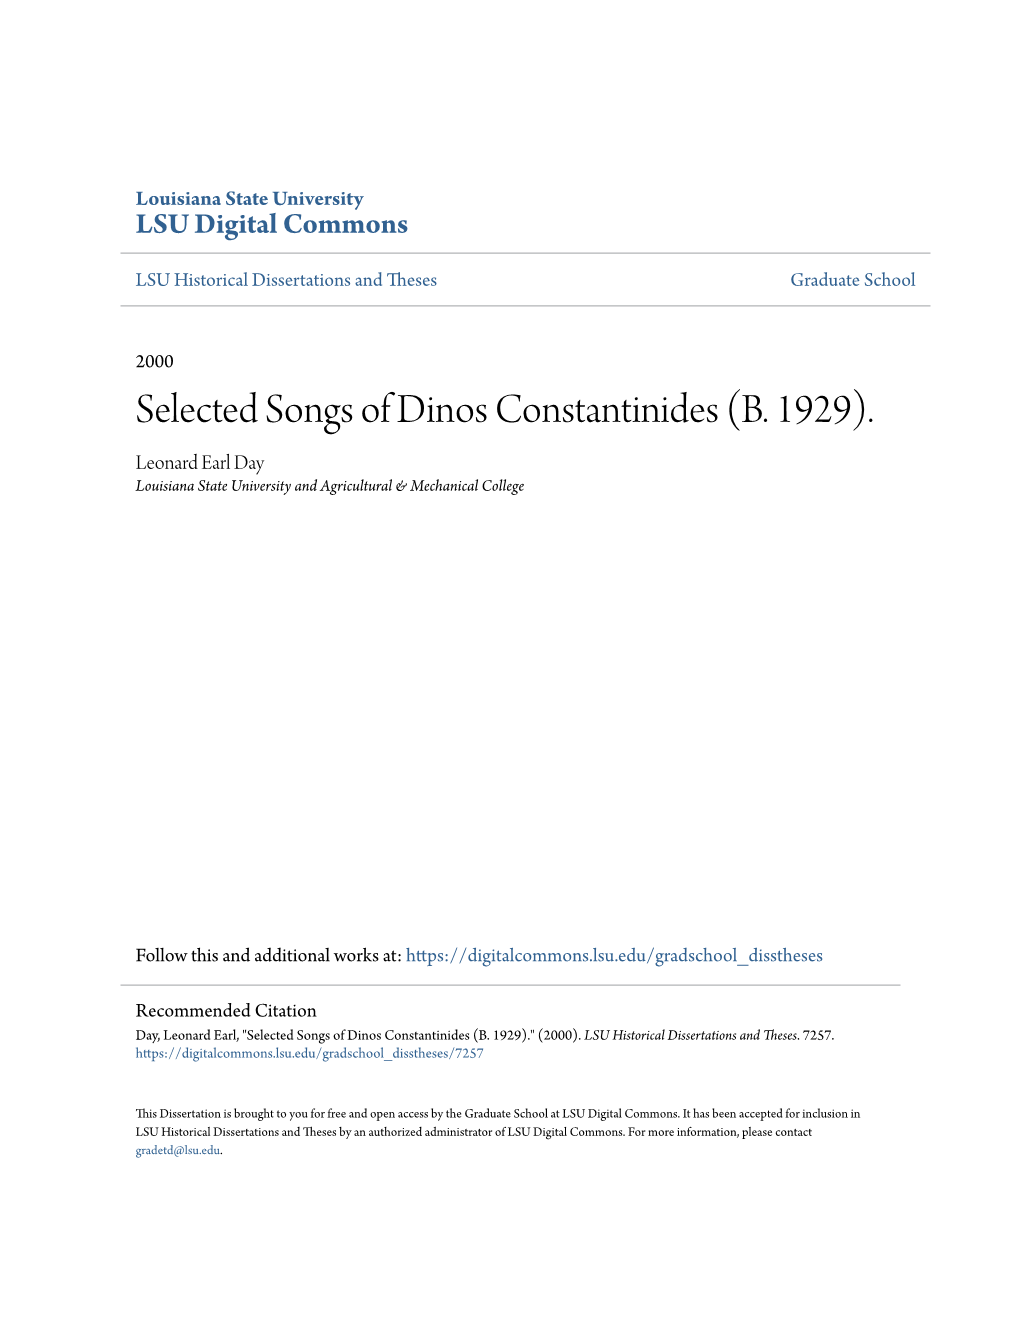 Selected Songs of Dinos Constantinides (B